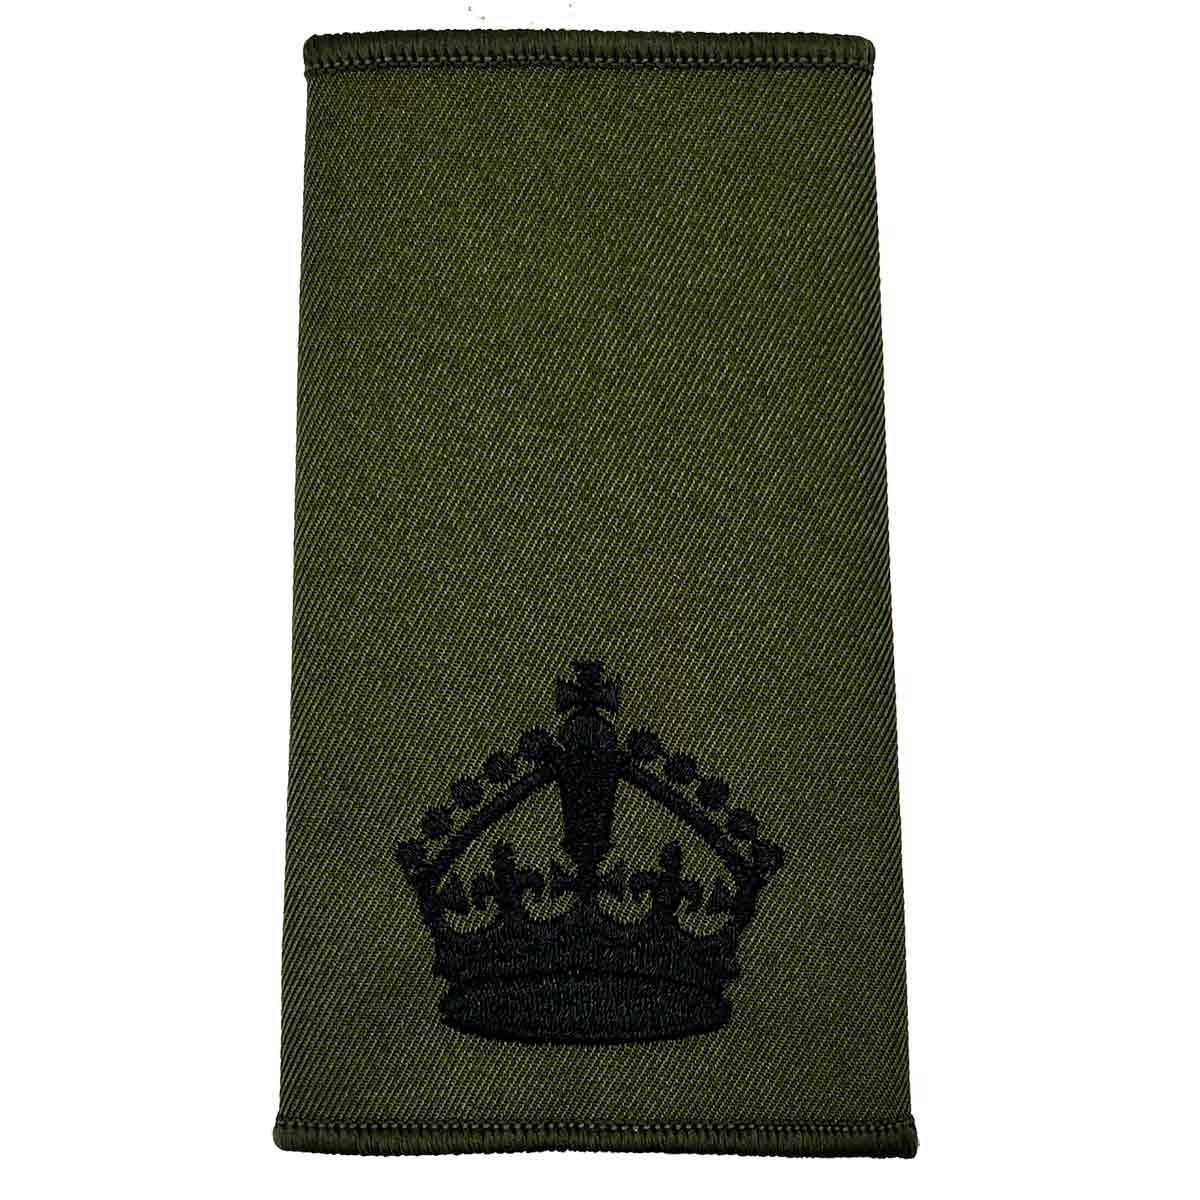 Olive Green Rank Slides with Black Embroidery (Pair) - John Bull Clothing